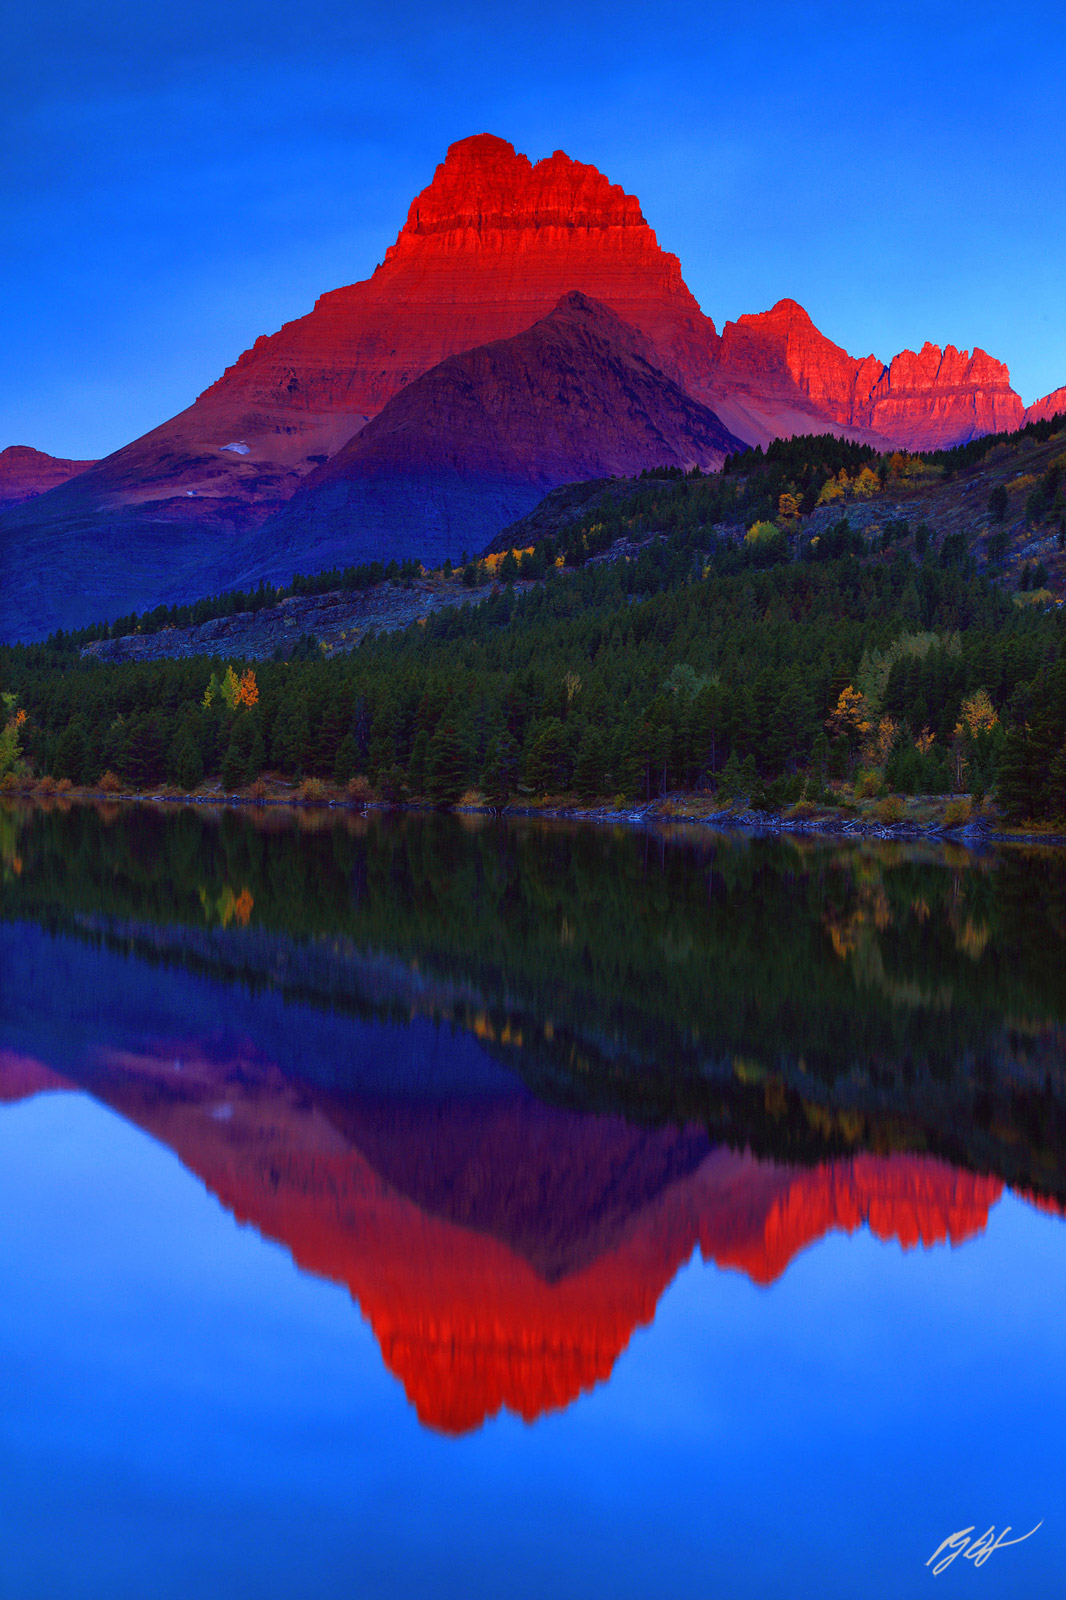 Sunrise Mt Wilber Reflected in Swift Current Lake in Glacier National Park in Montana